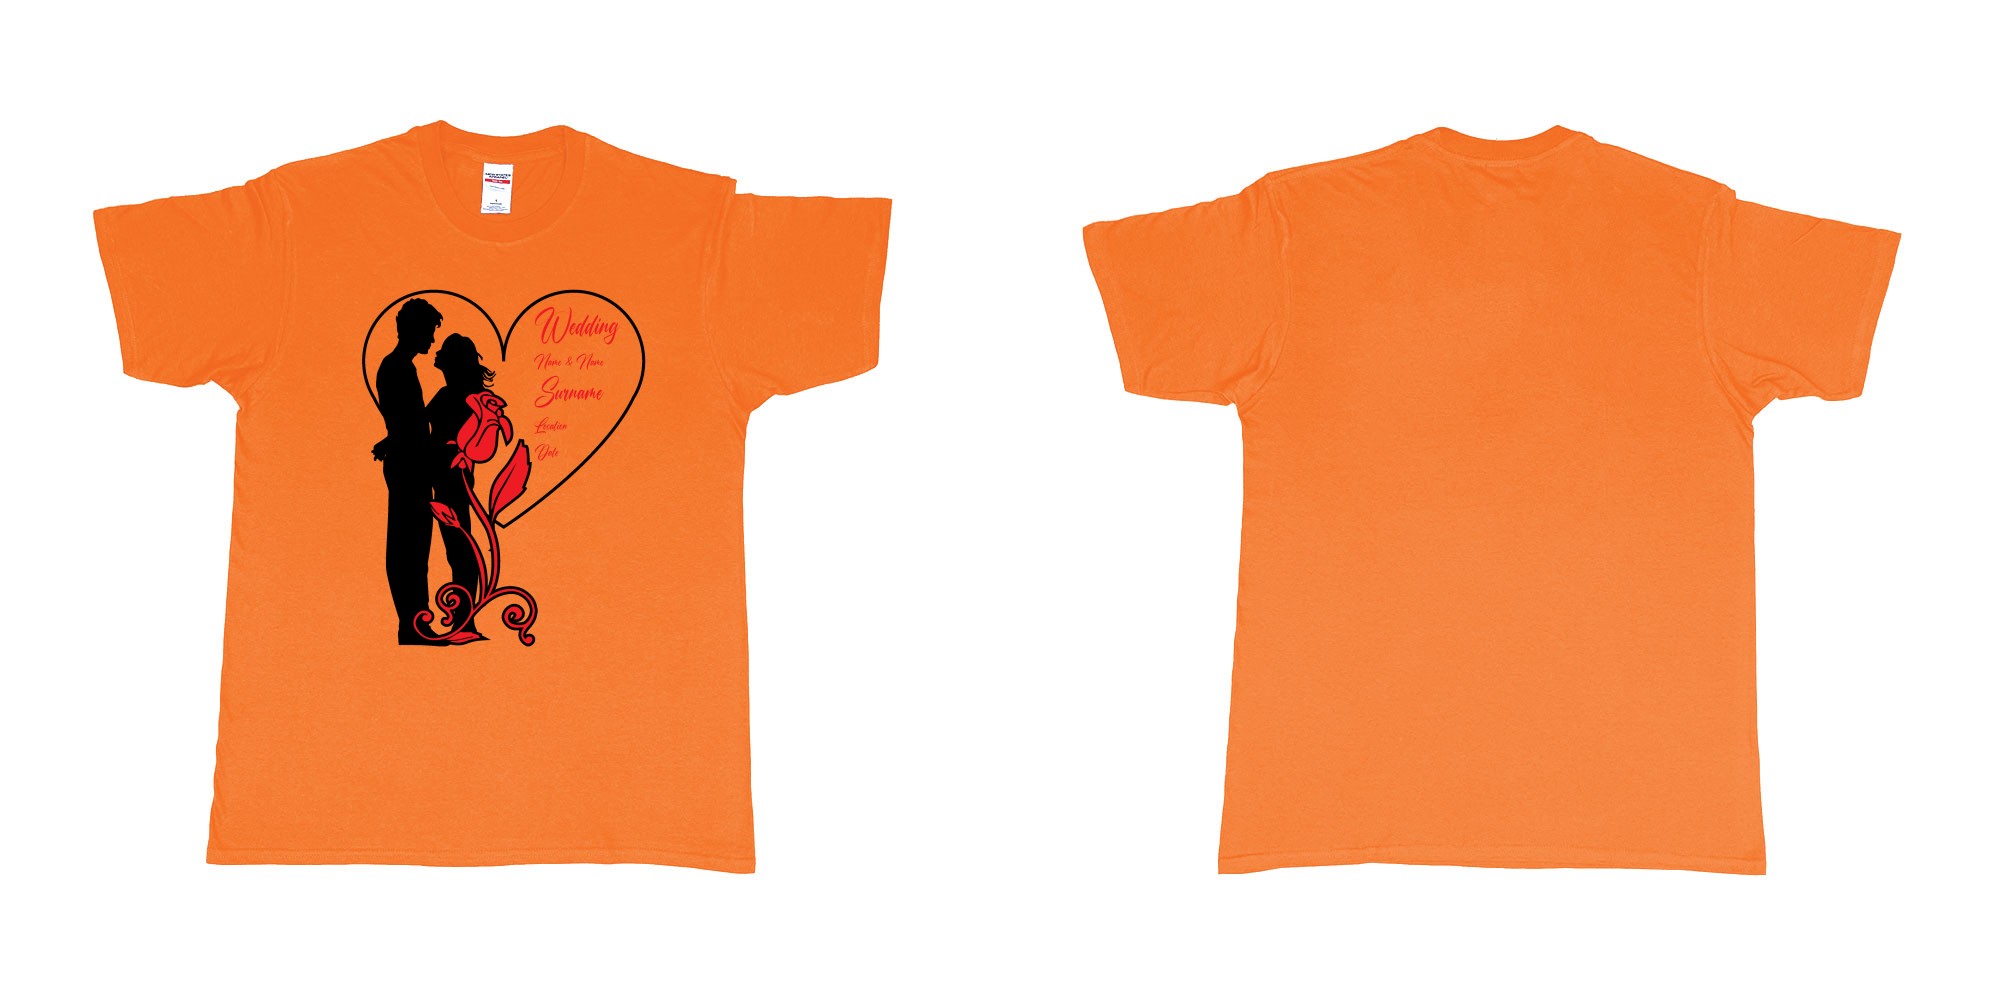 Custom tshirt design wedding couple rose heart in fabric color orange choice your own text made in Bali by The Pirate Way